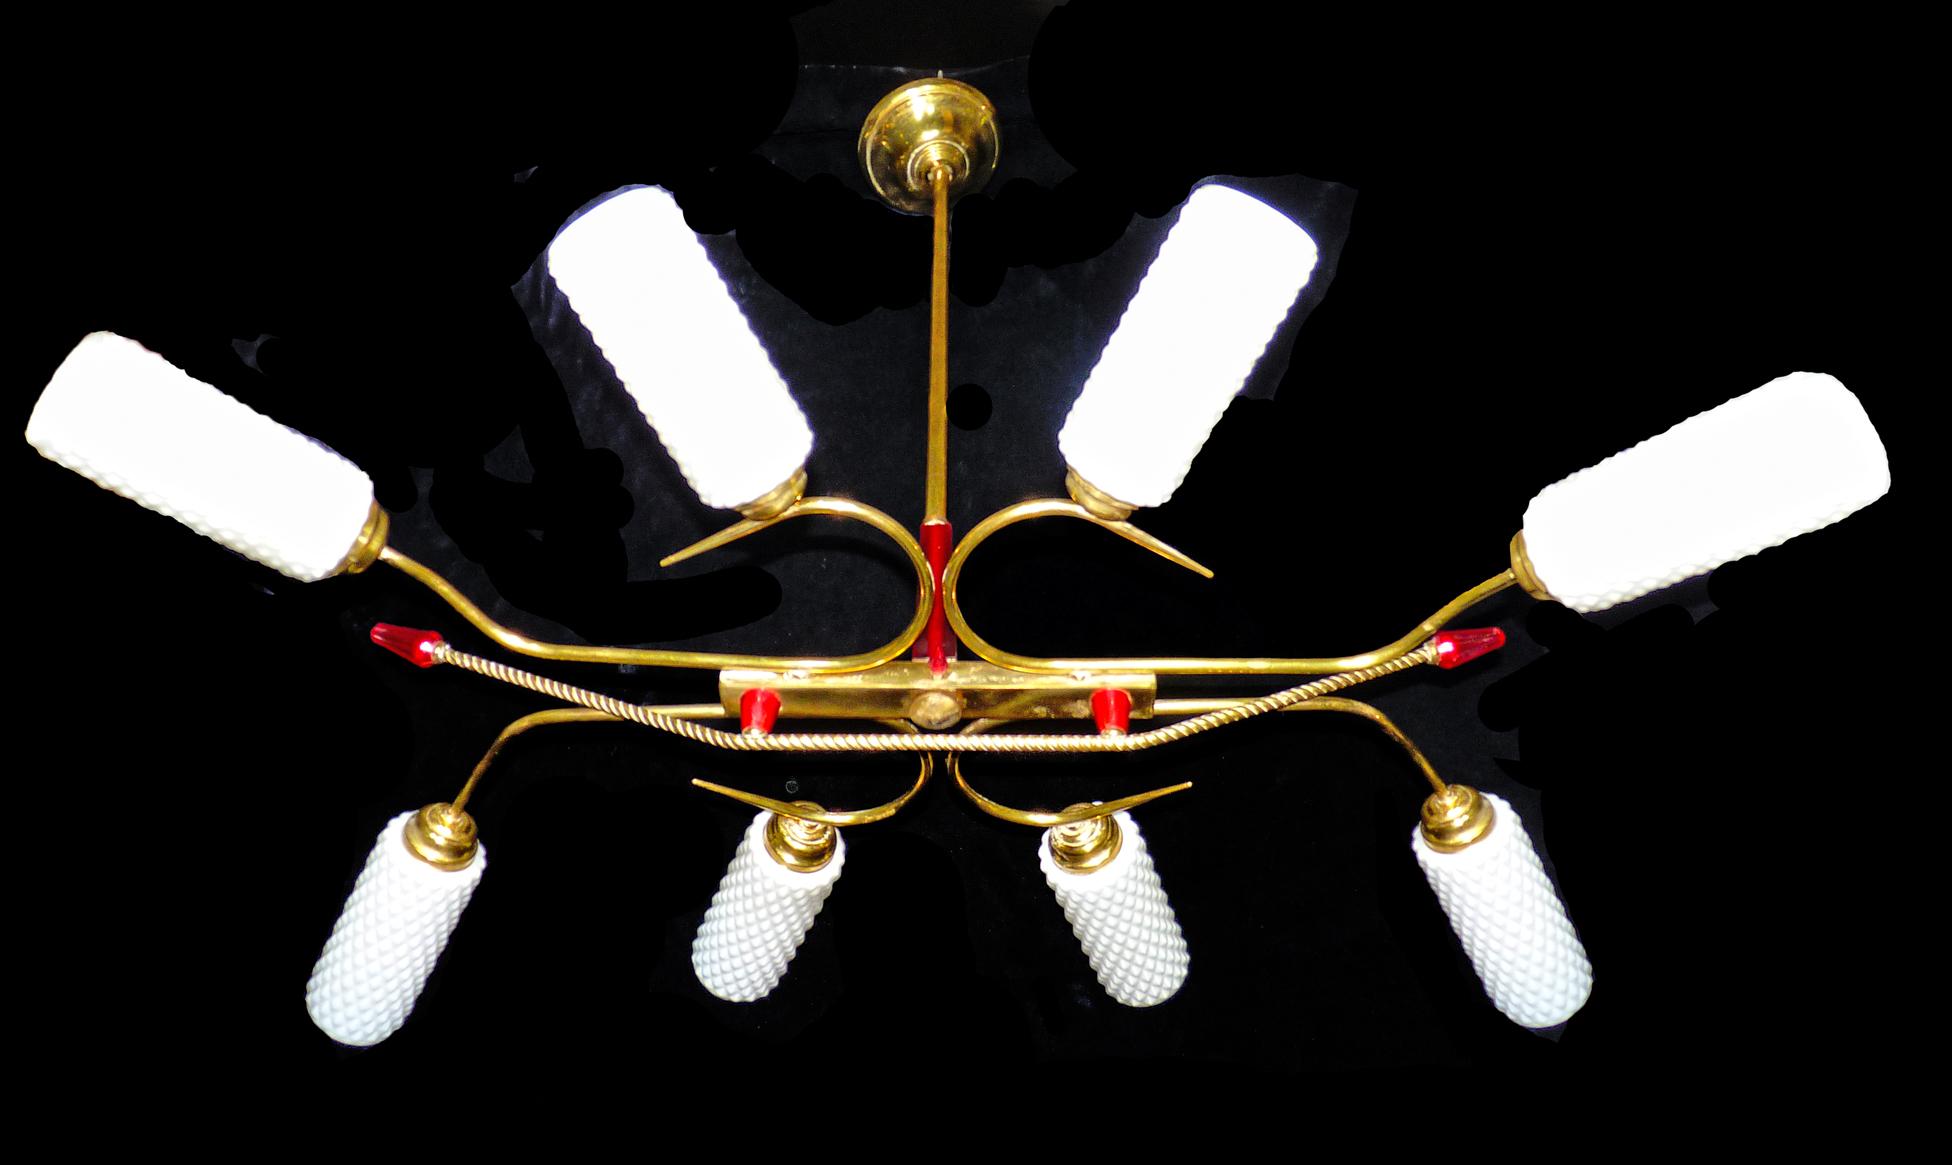 Rare gorgeous large sculptural French Mid-Century Modernist French Art Deco attributed to Maison Lunel, gilt brass and ruby red Lucite Sputnik chandelier with eight lights/ circa 1960, Stilnovo Gio Ponti era
Measures:
Width 36 in / 90 cm
Height 28